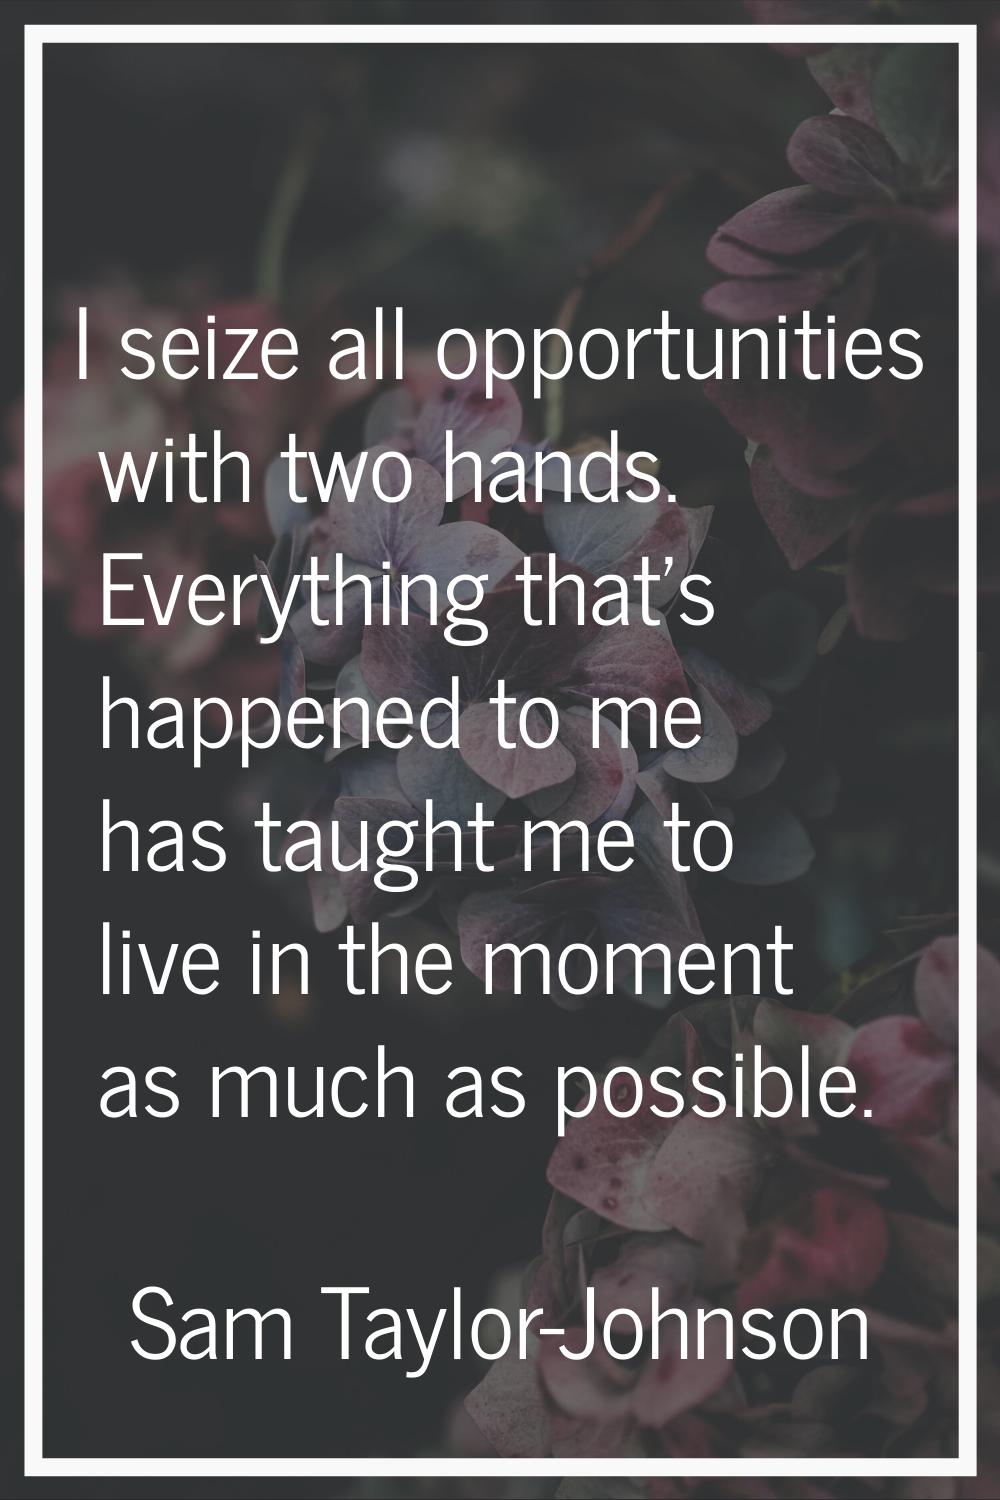 I seize all opportunities with two hands. Everything that's happened to me has taught me to live in